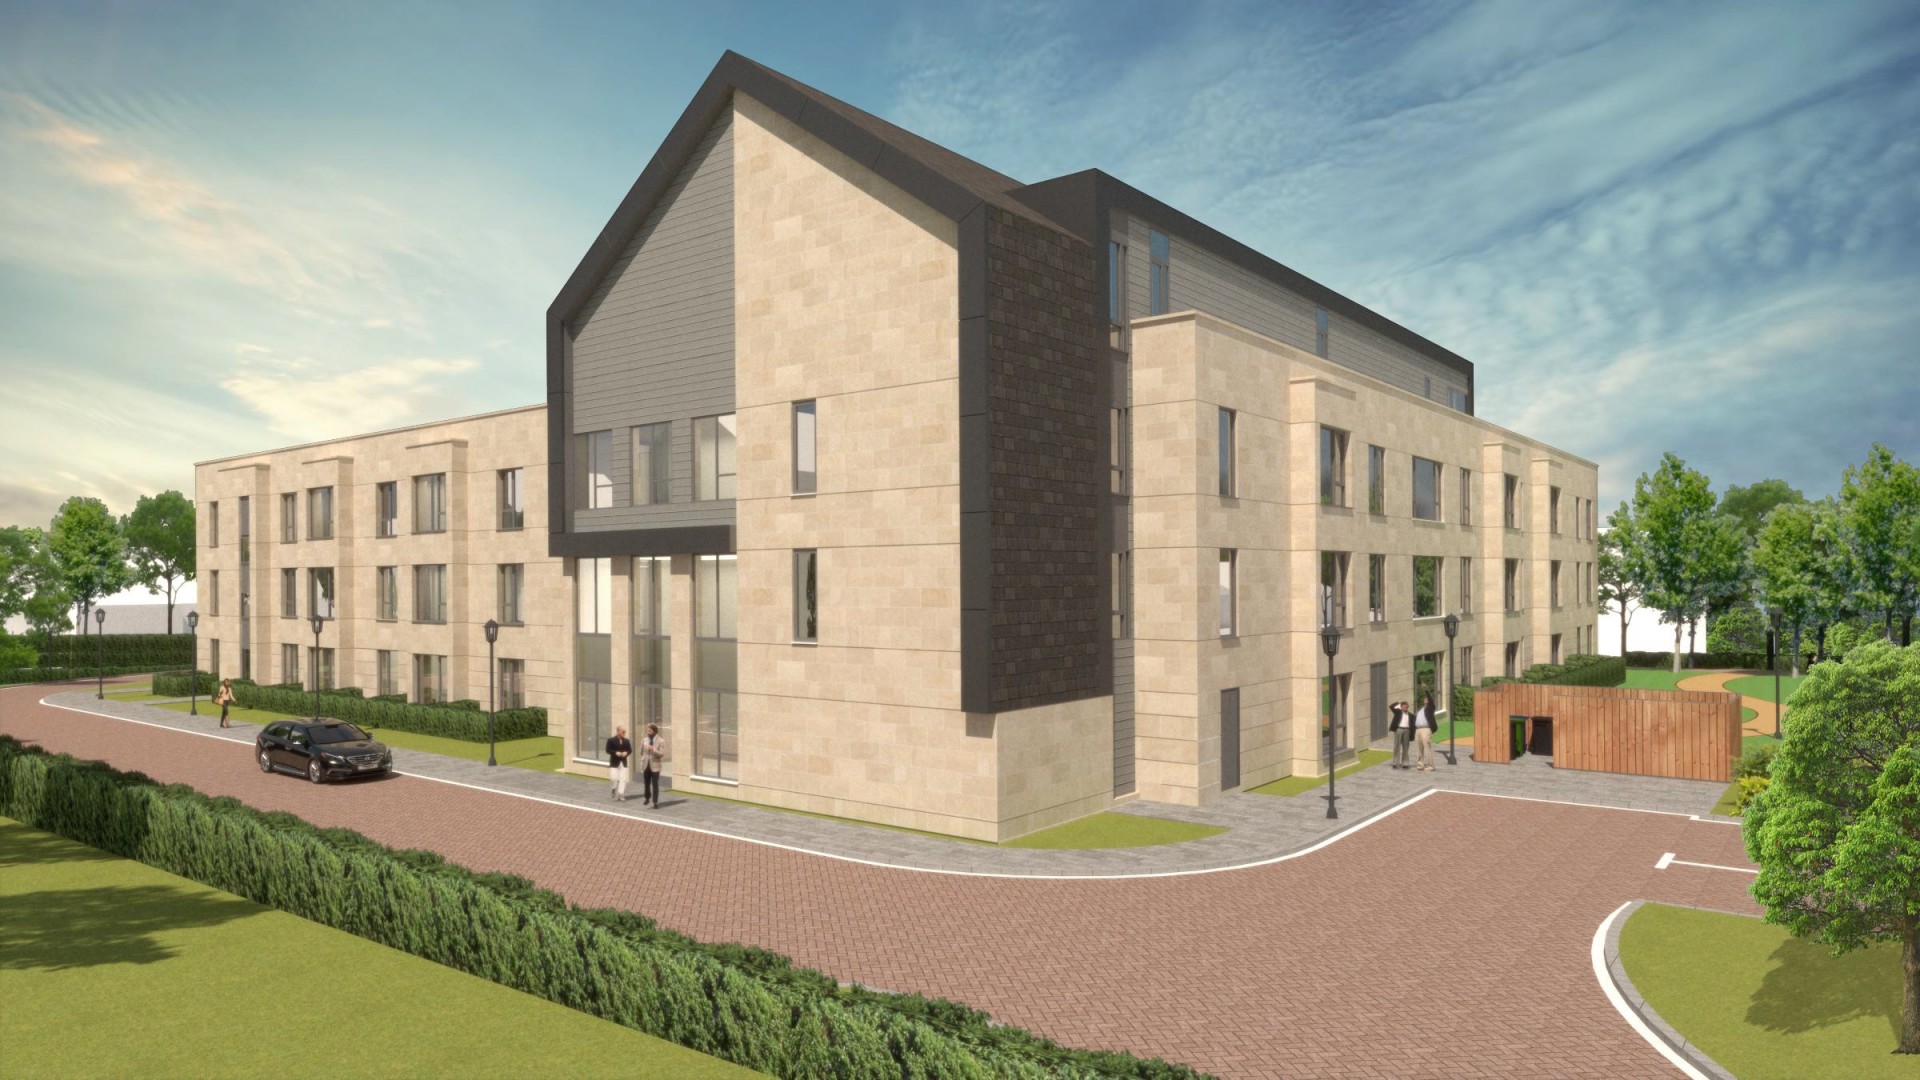 Care home planned for Glasgow bowling club site